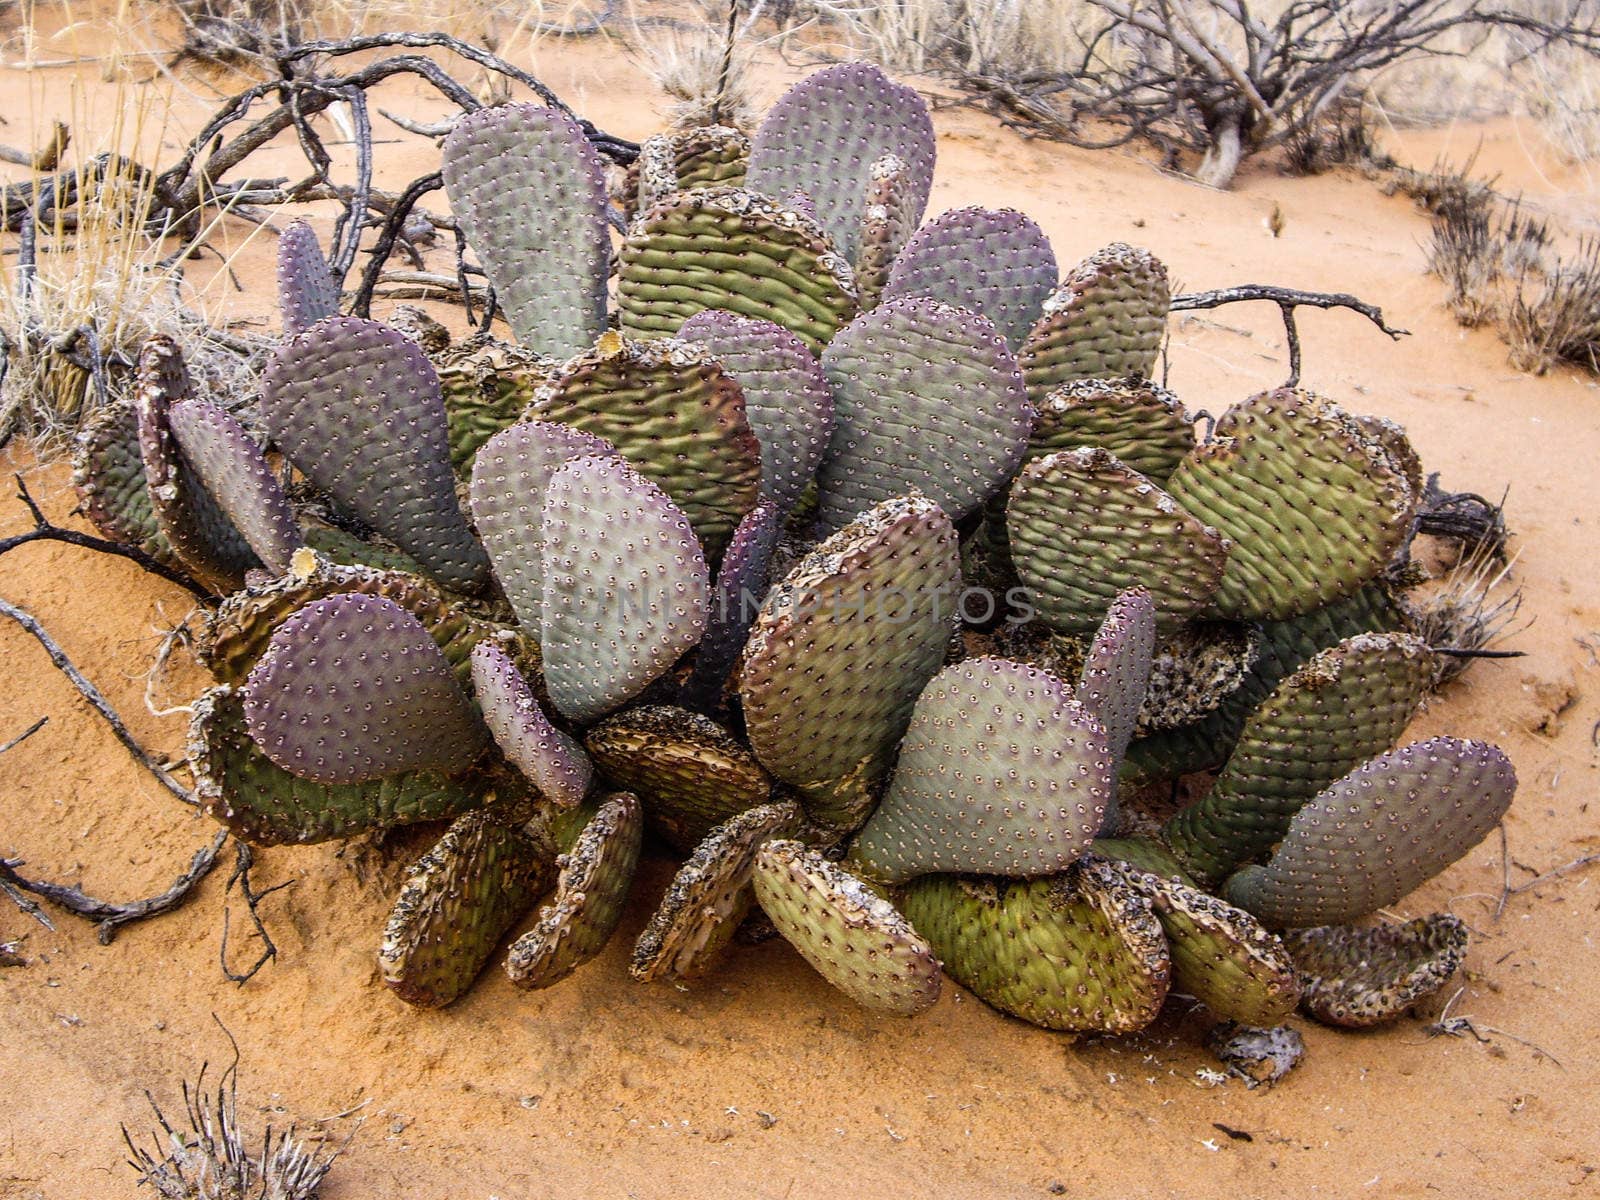 Prickly Pear Cactus by emattil